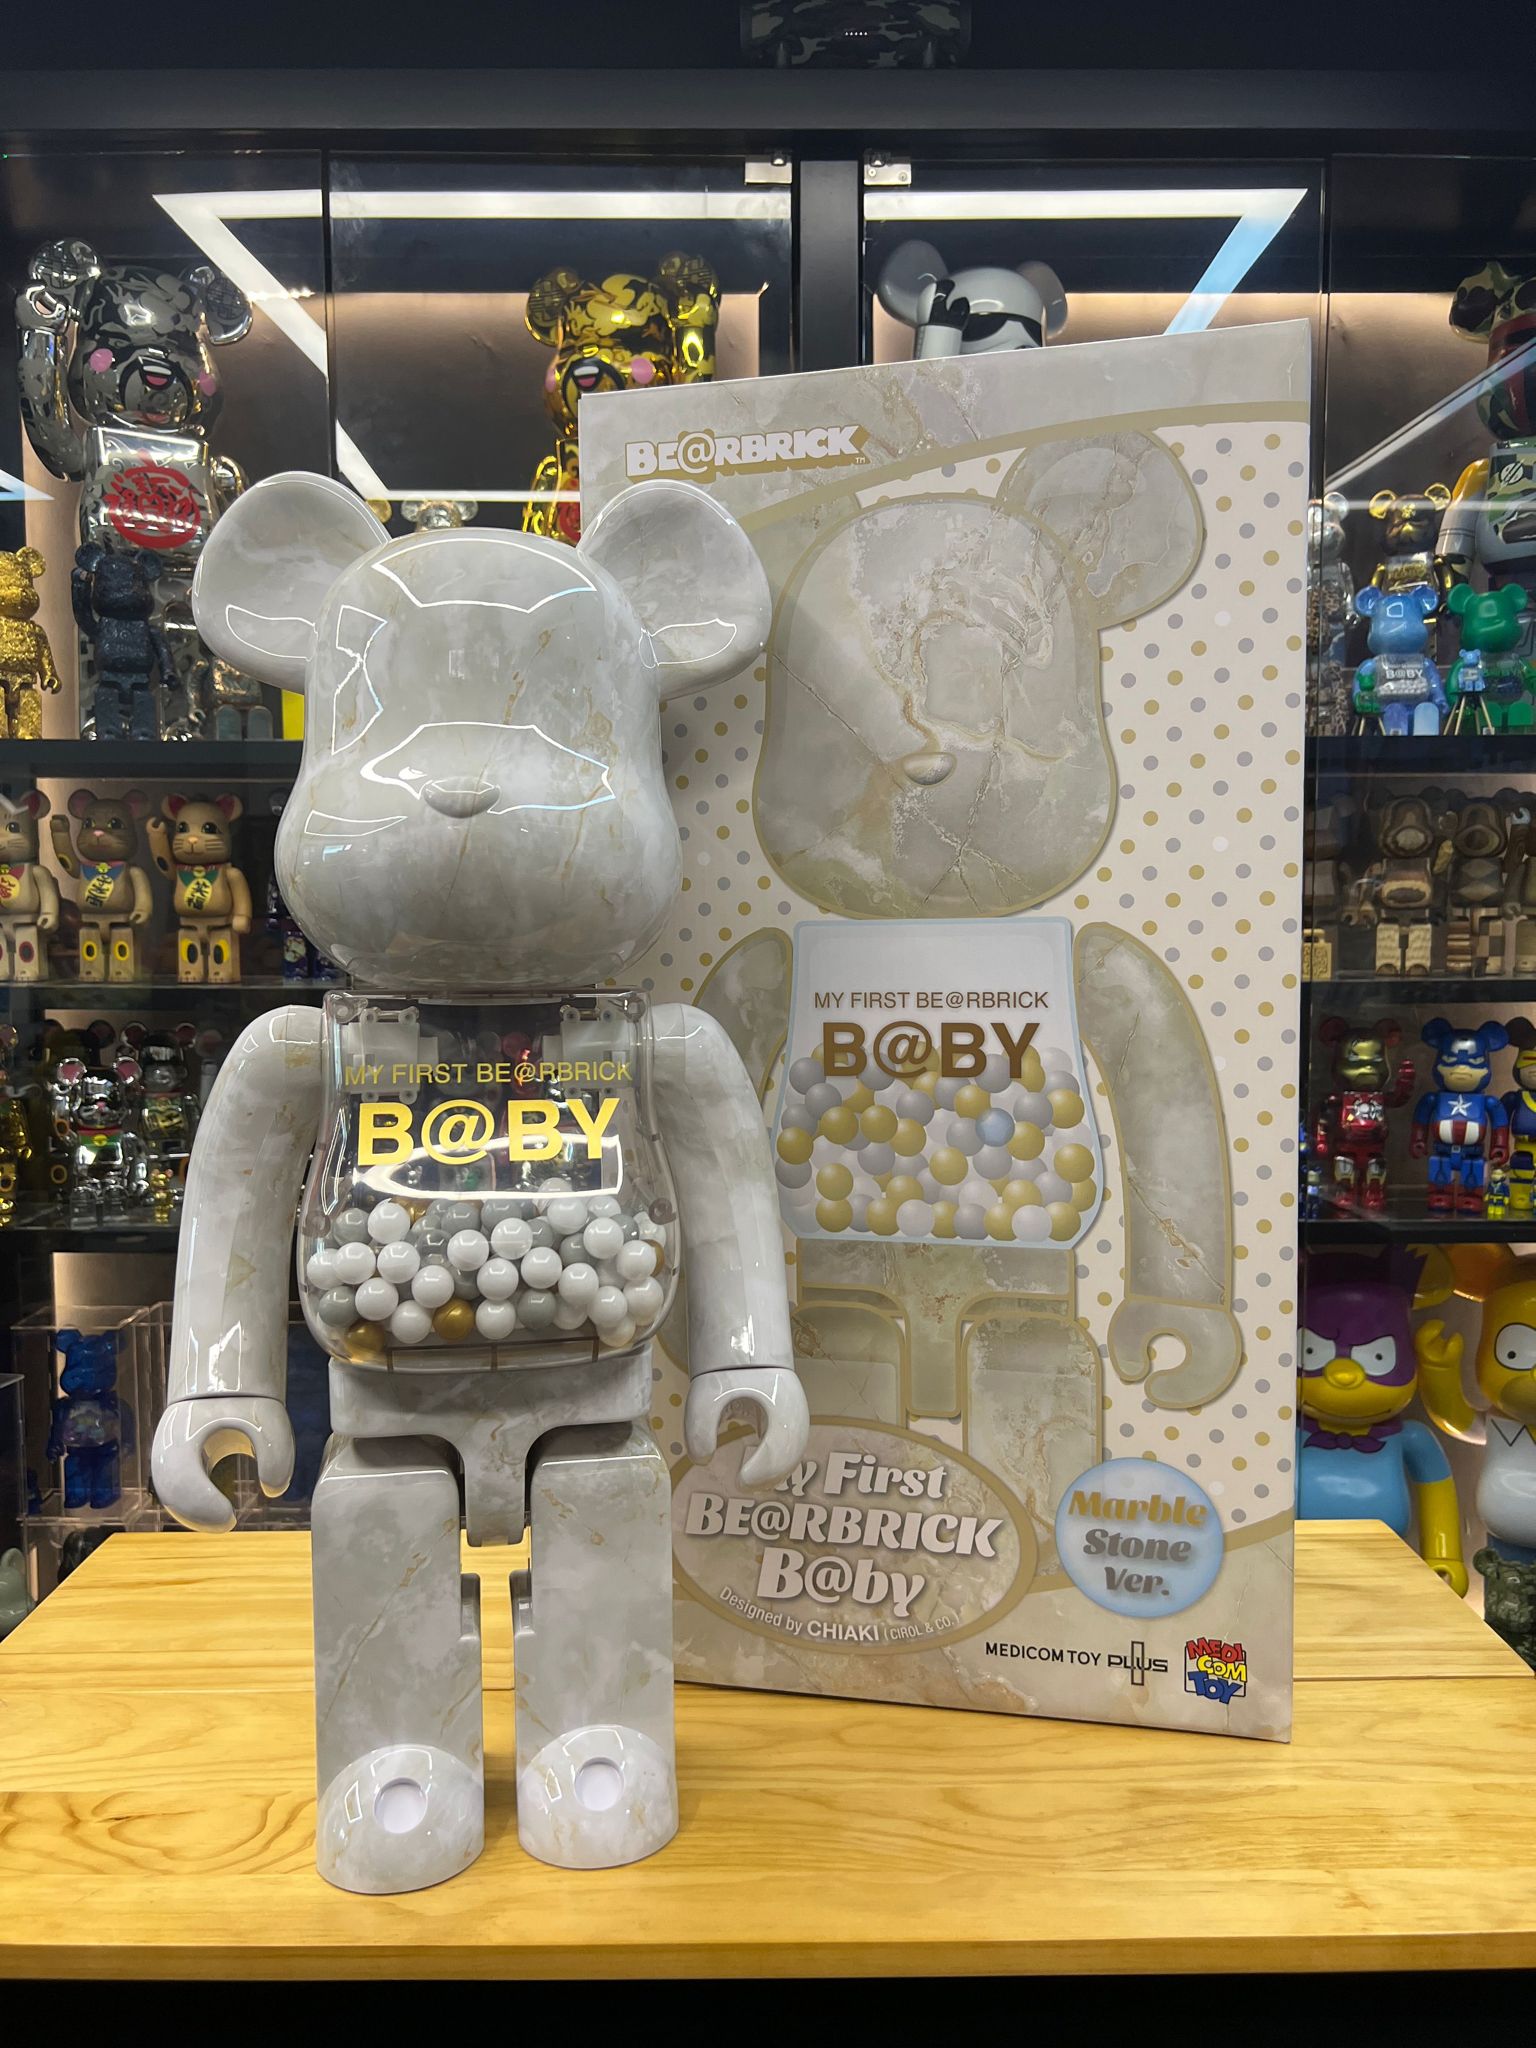 1000％ My First Be@rbrick B@BY Baby Marble (大理石) Ver. – Madmaxtoys